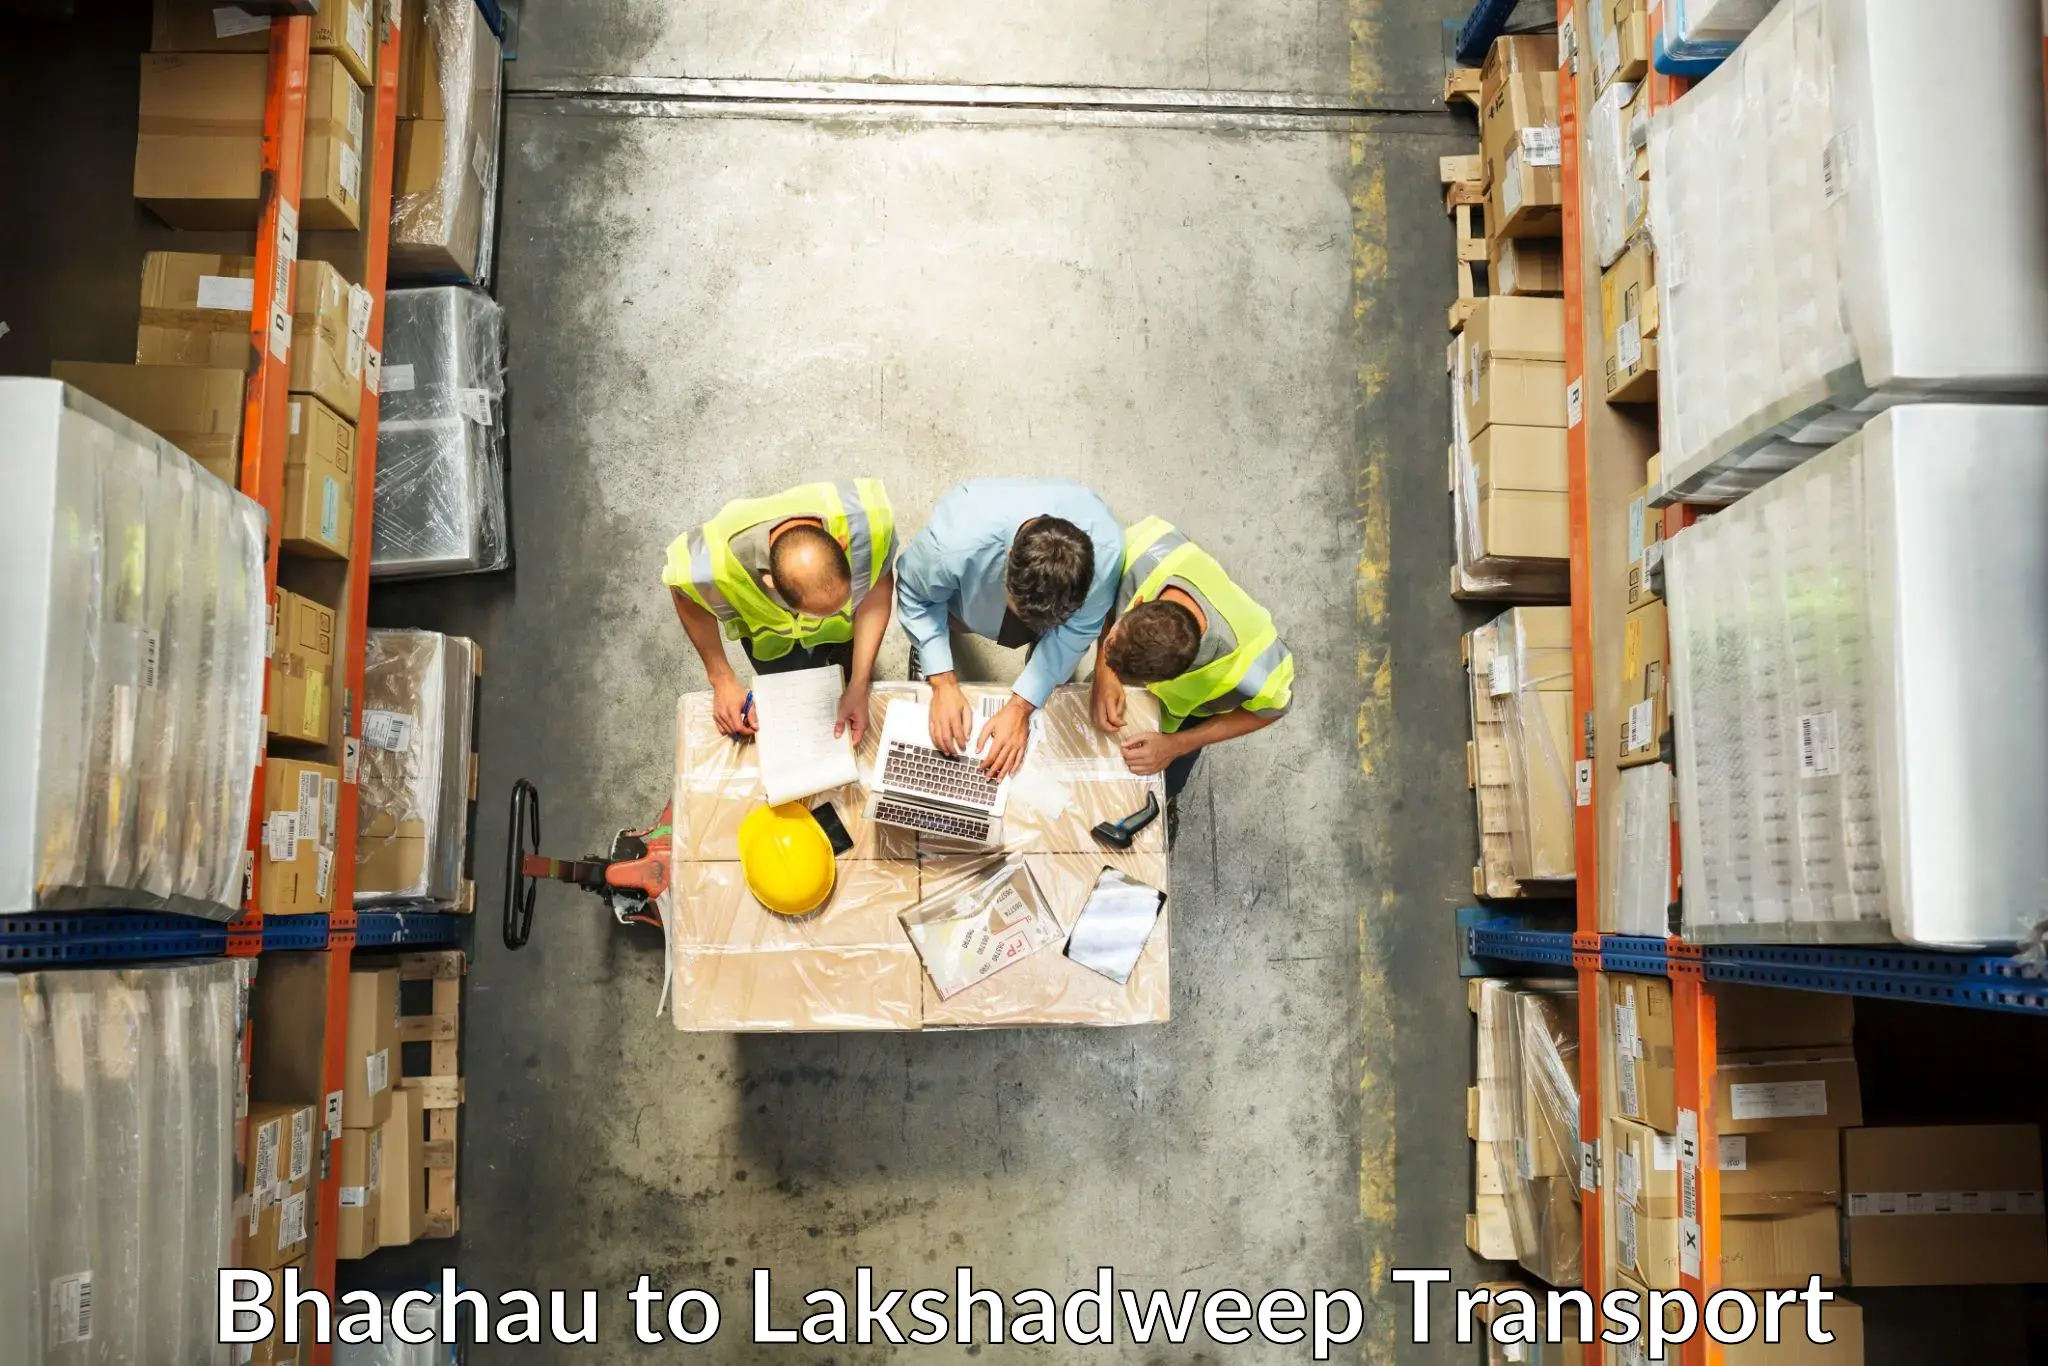 Part load transport service in India Bhachau to Lakshadweep